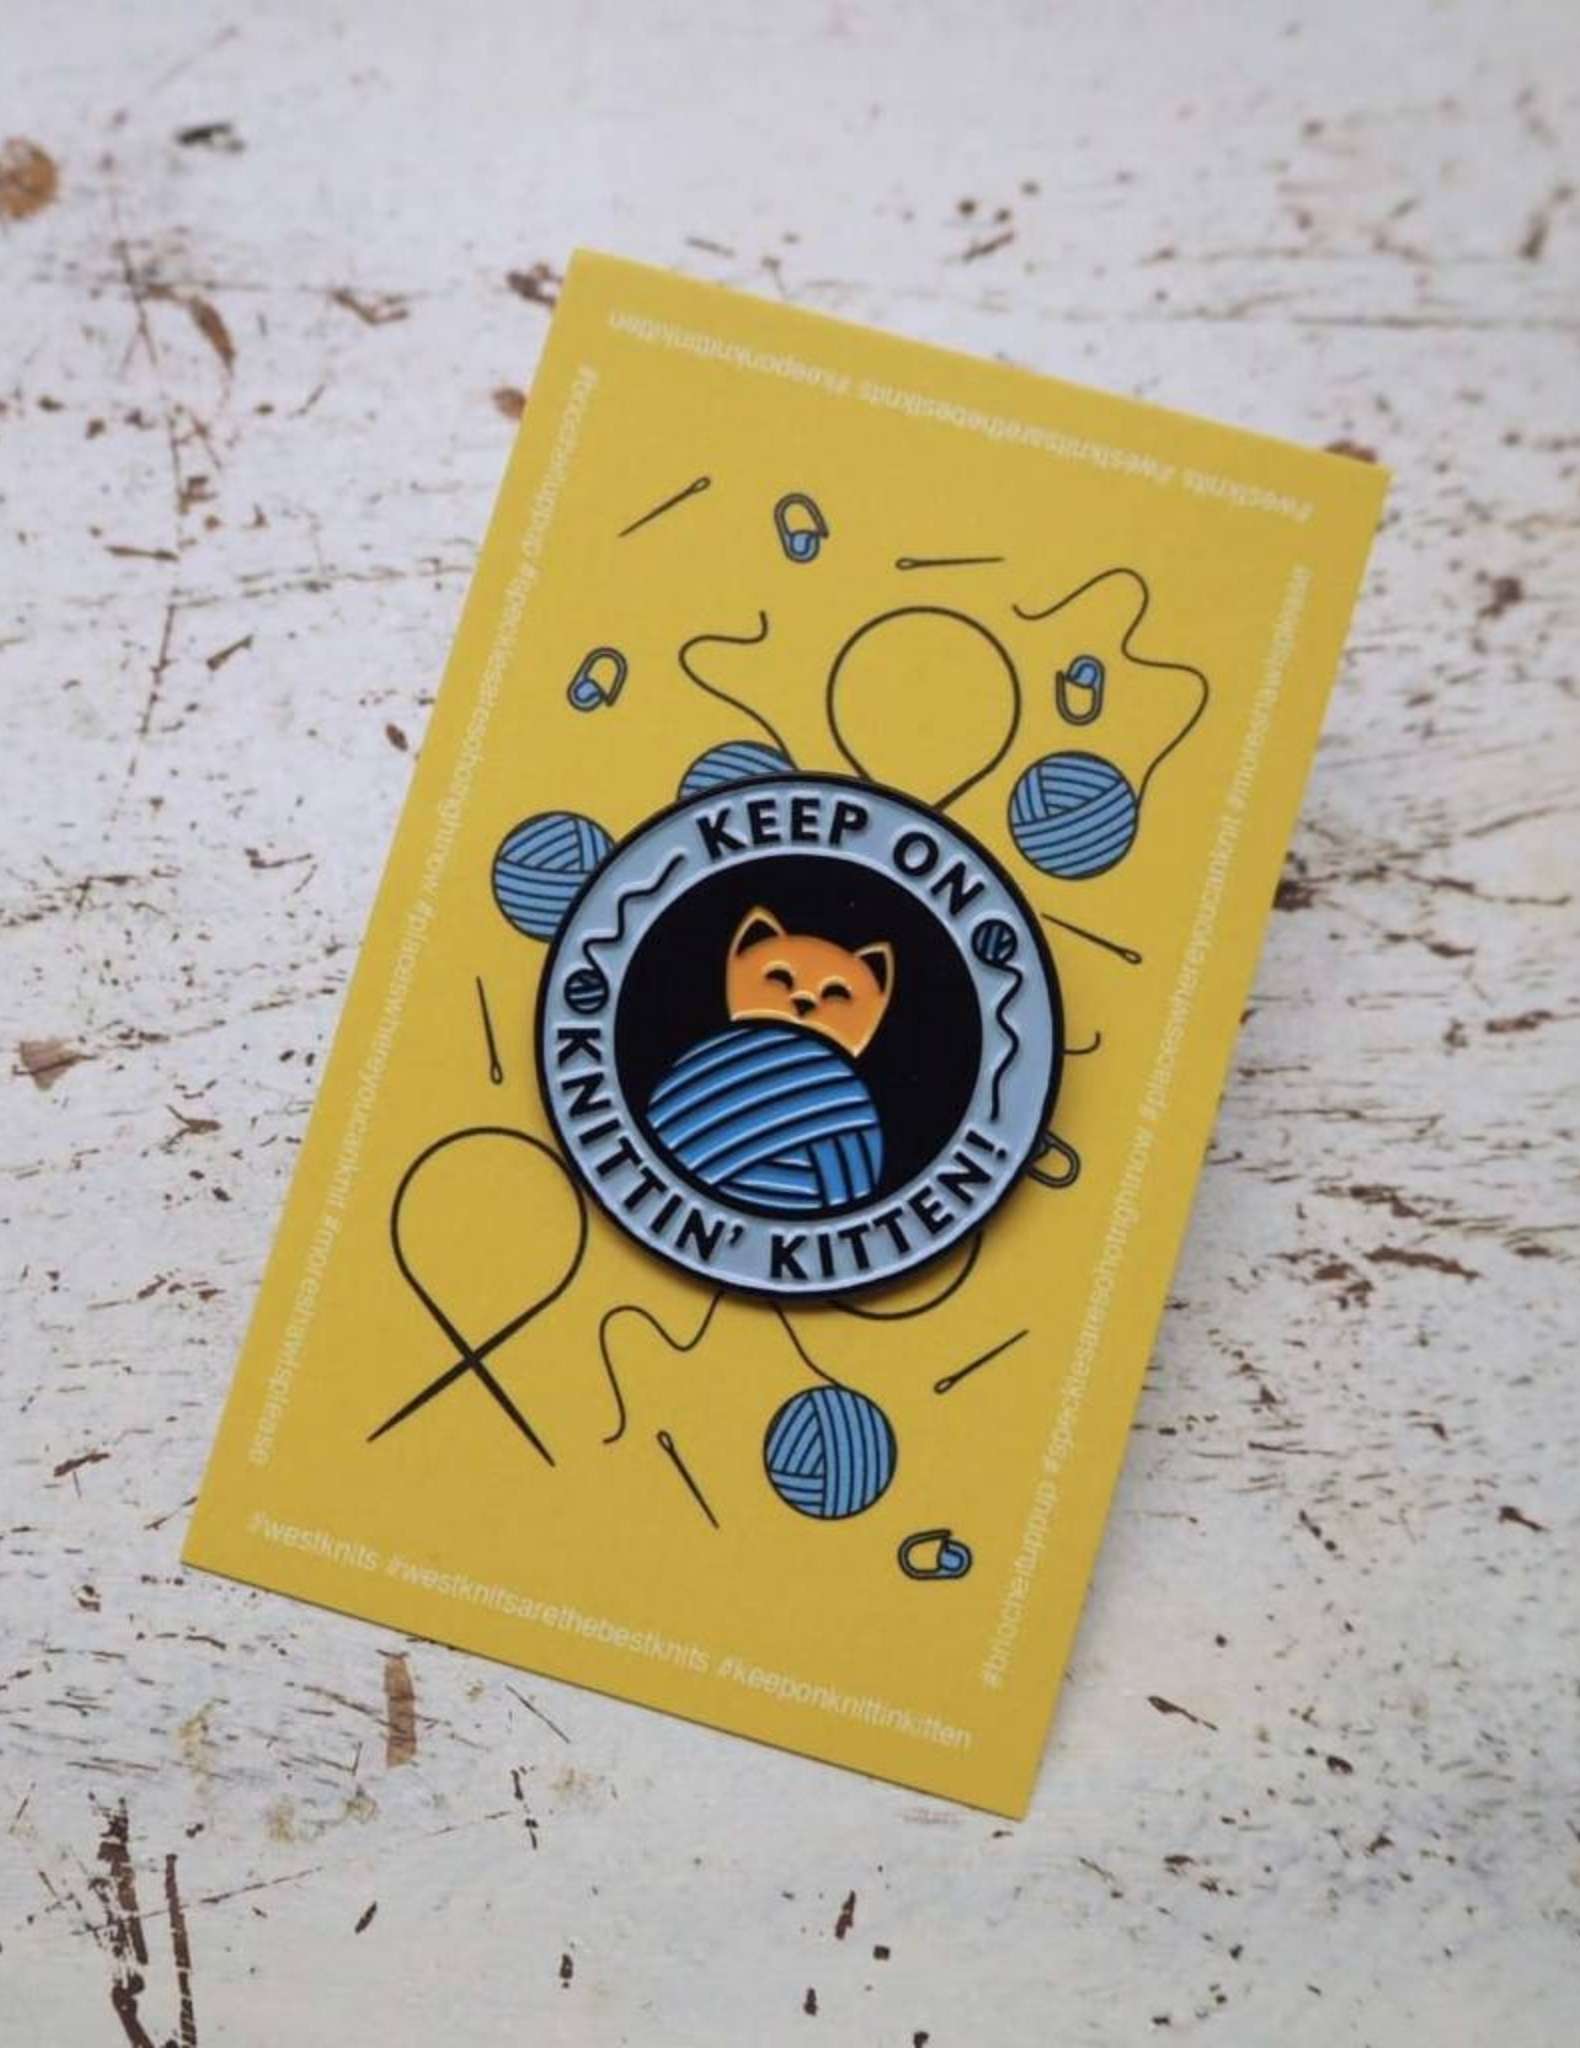 An enamel pin saying 'keep on knittin' kitten' showing a cat and a ball of yarn